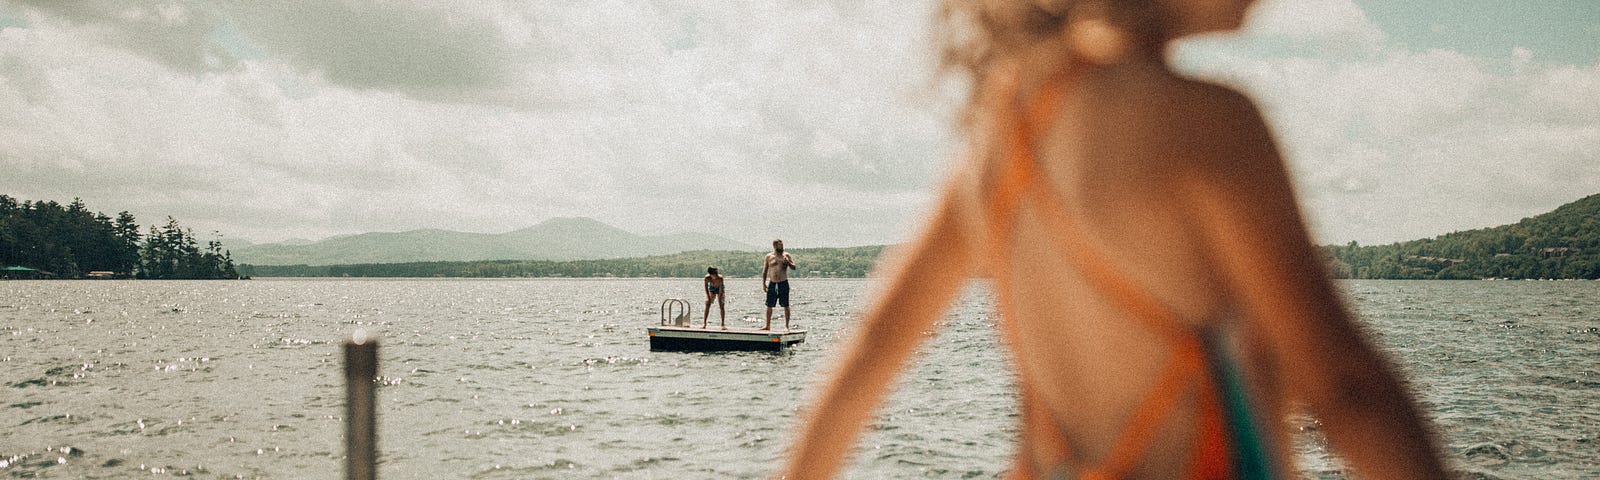 Child in a striped bathing suit standing by a lake in the foreground with two older people standing on a floating raft in the background.